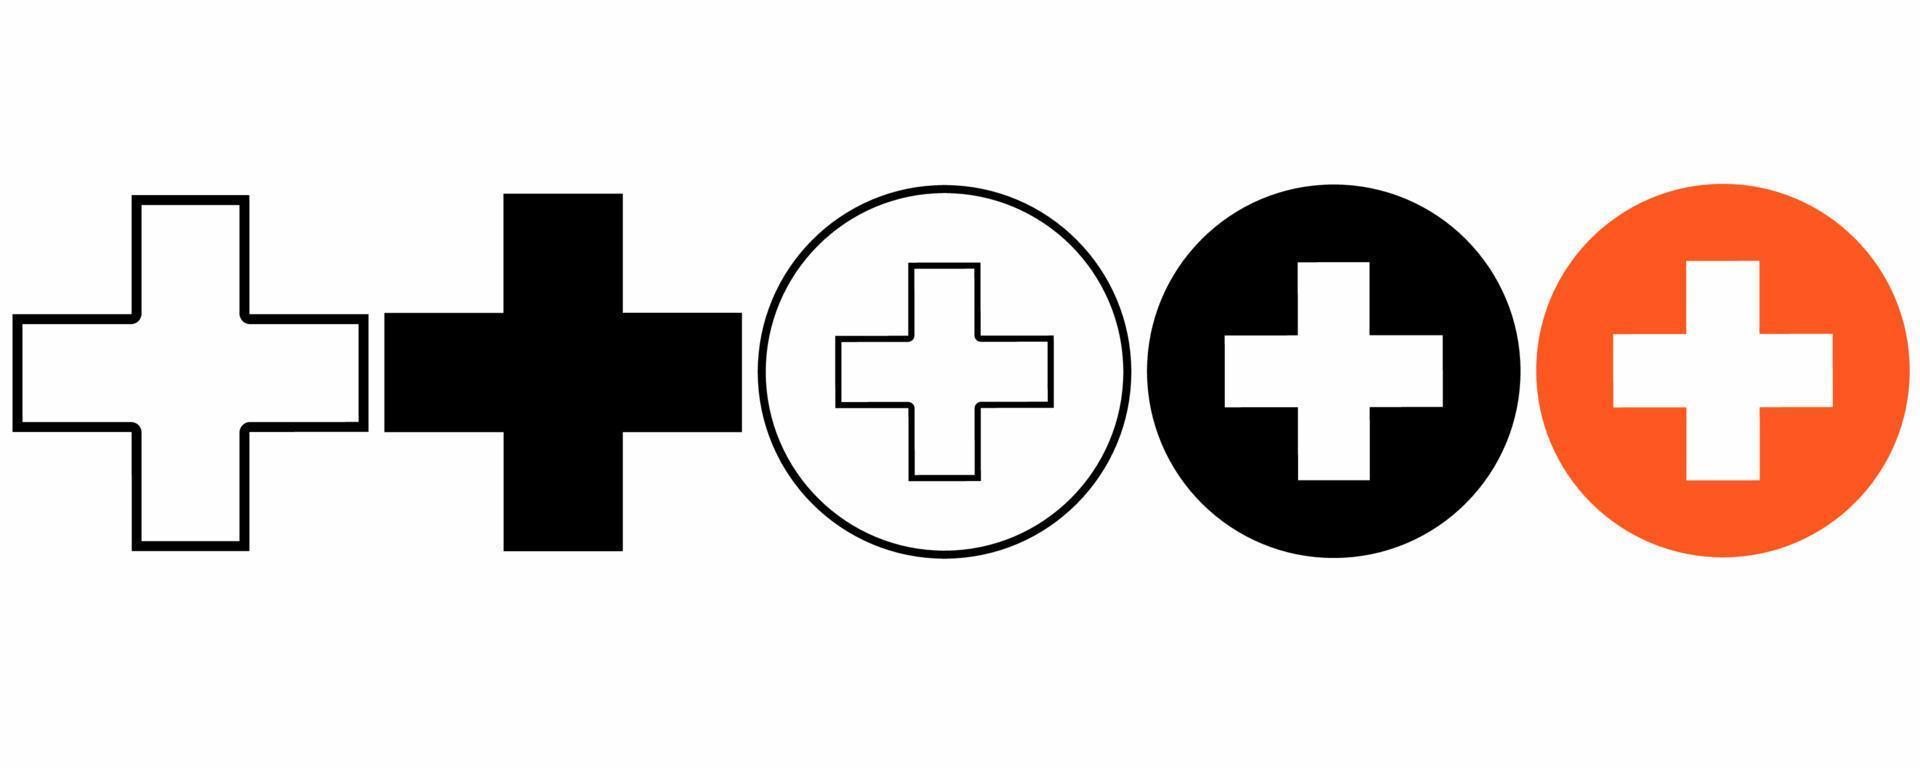 Medical cross symbol set isolated on white background vector